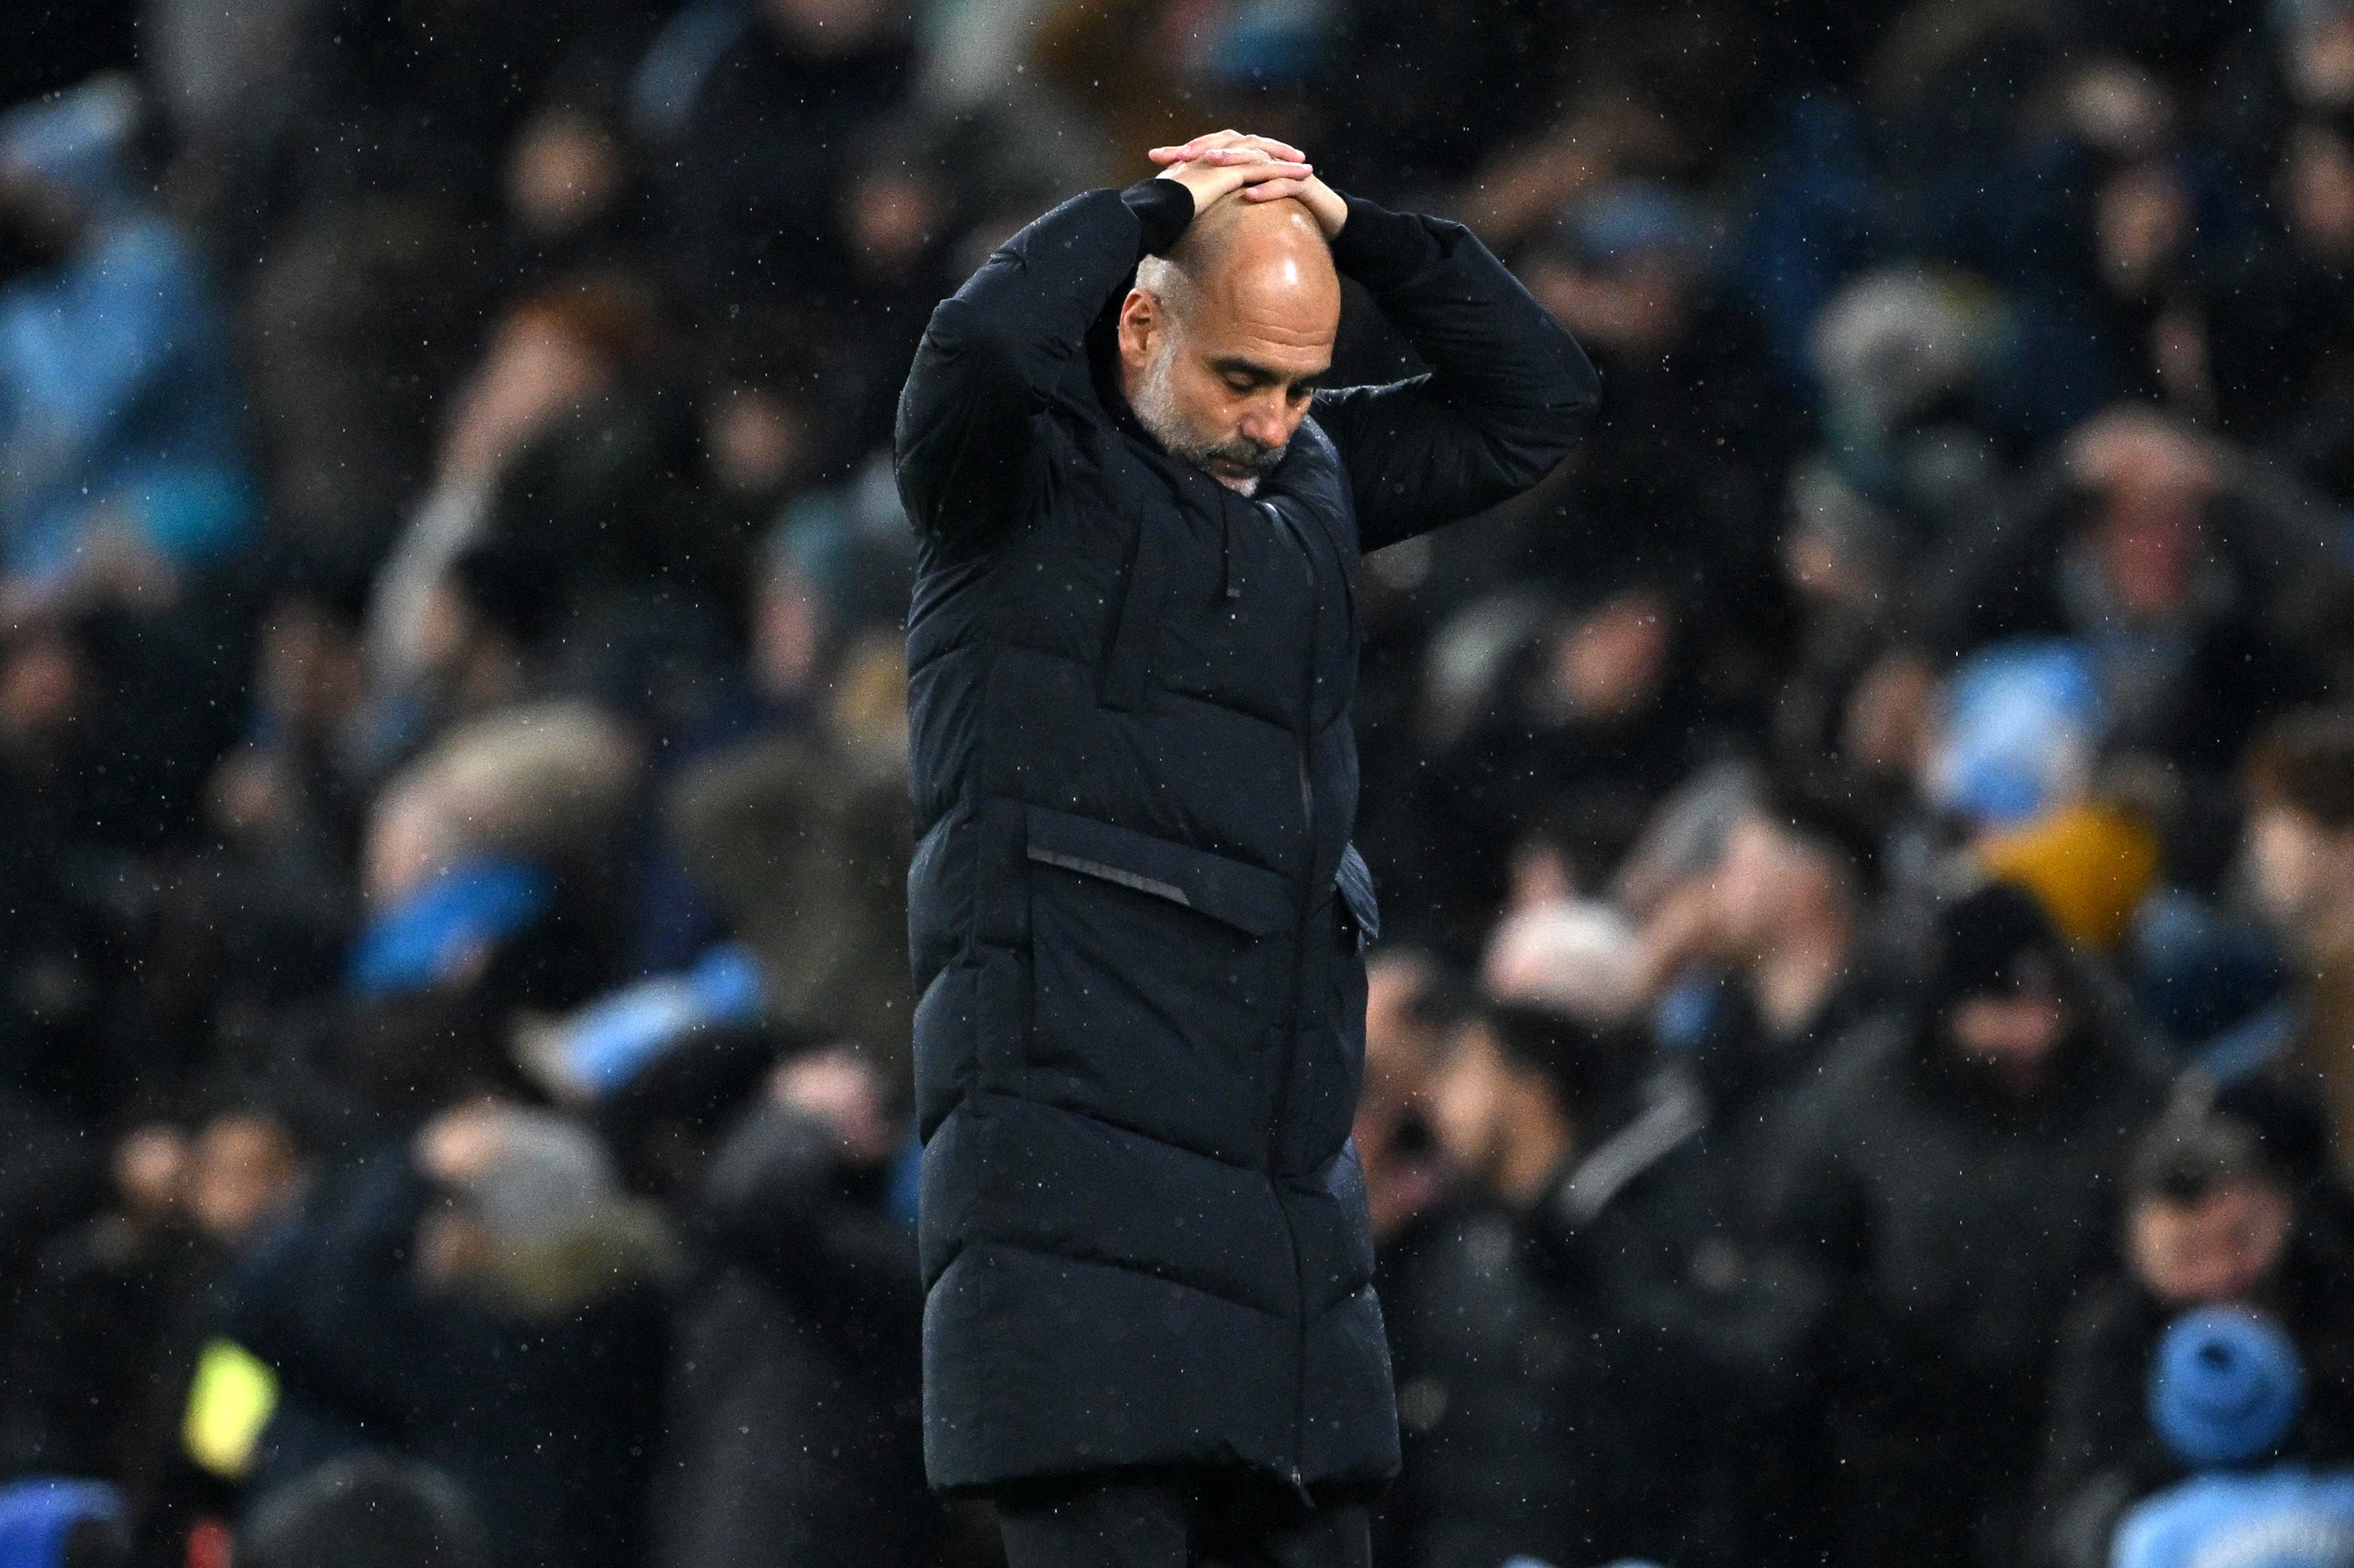 Guardiola’s side dropped points for a third game in a row